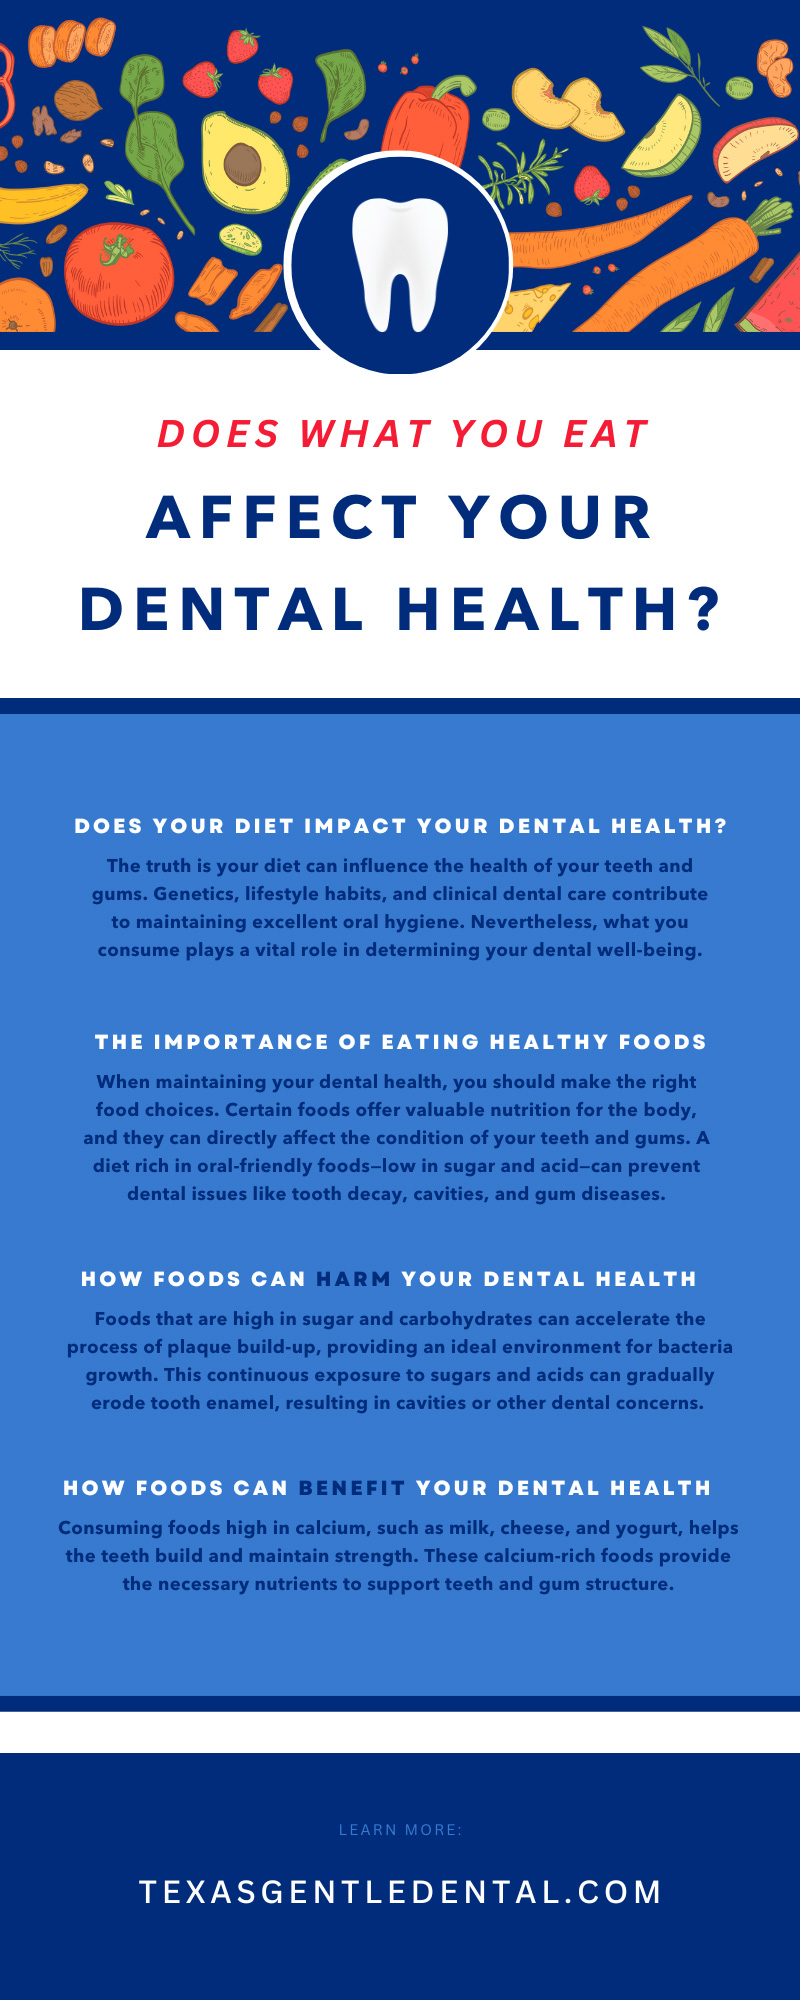 Does What You Eat Affect Your Dental Health?